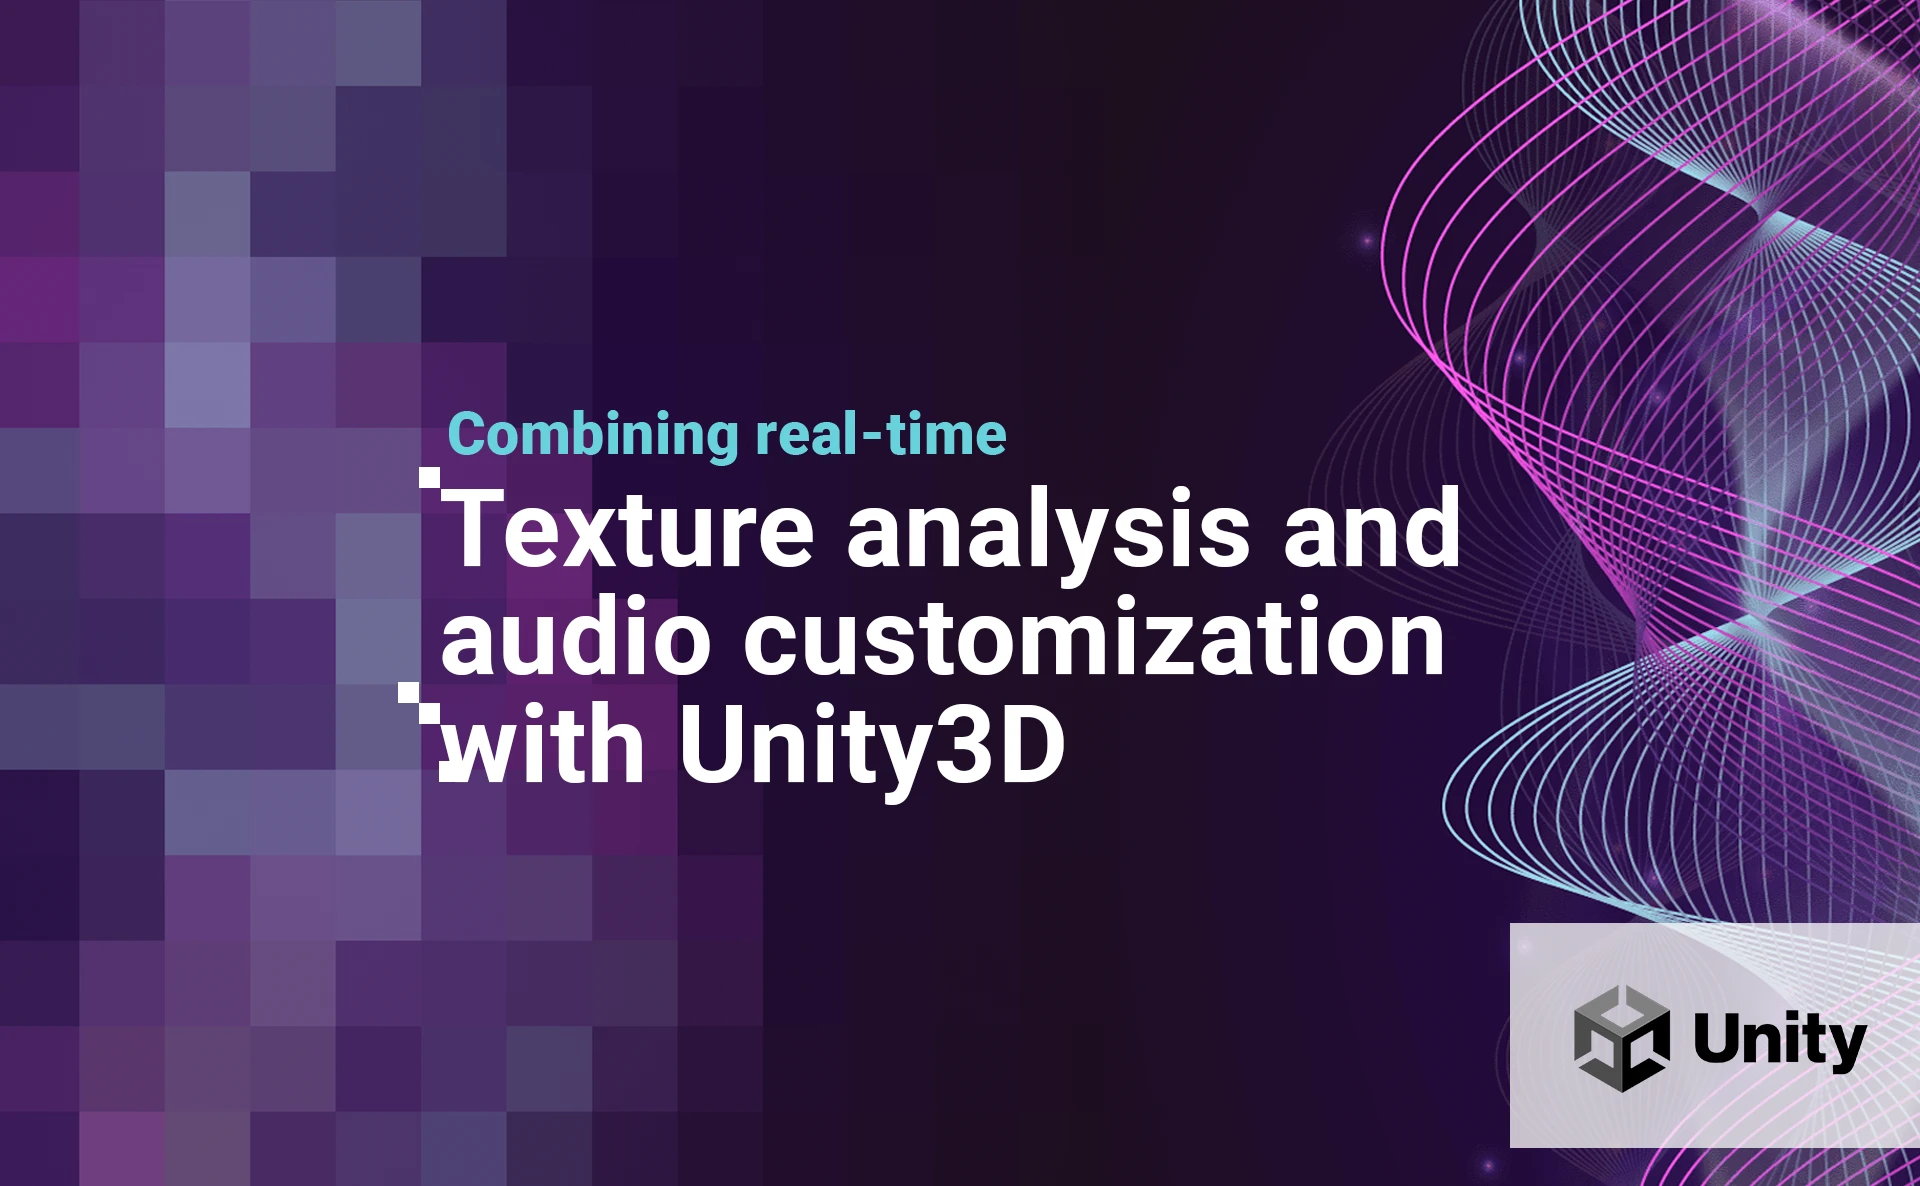 Combining real-time Texture analysis and audio customization with Unity3D